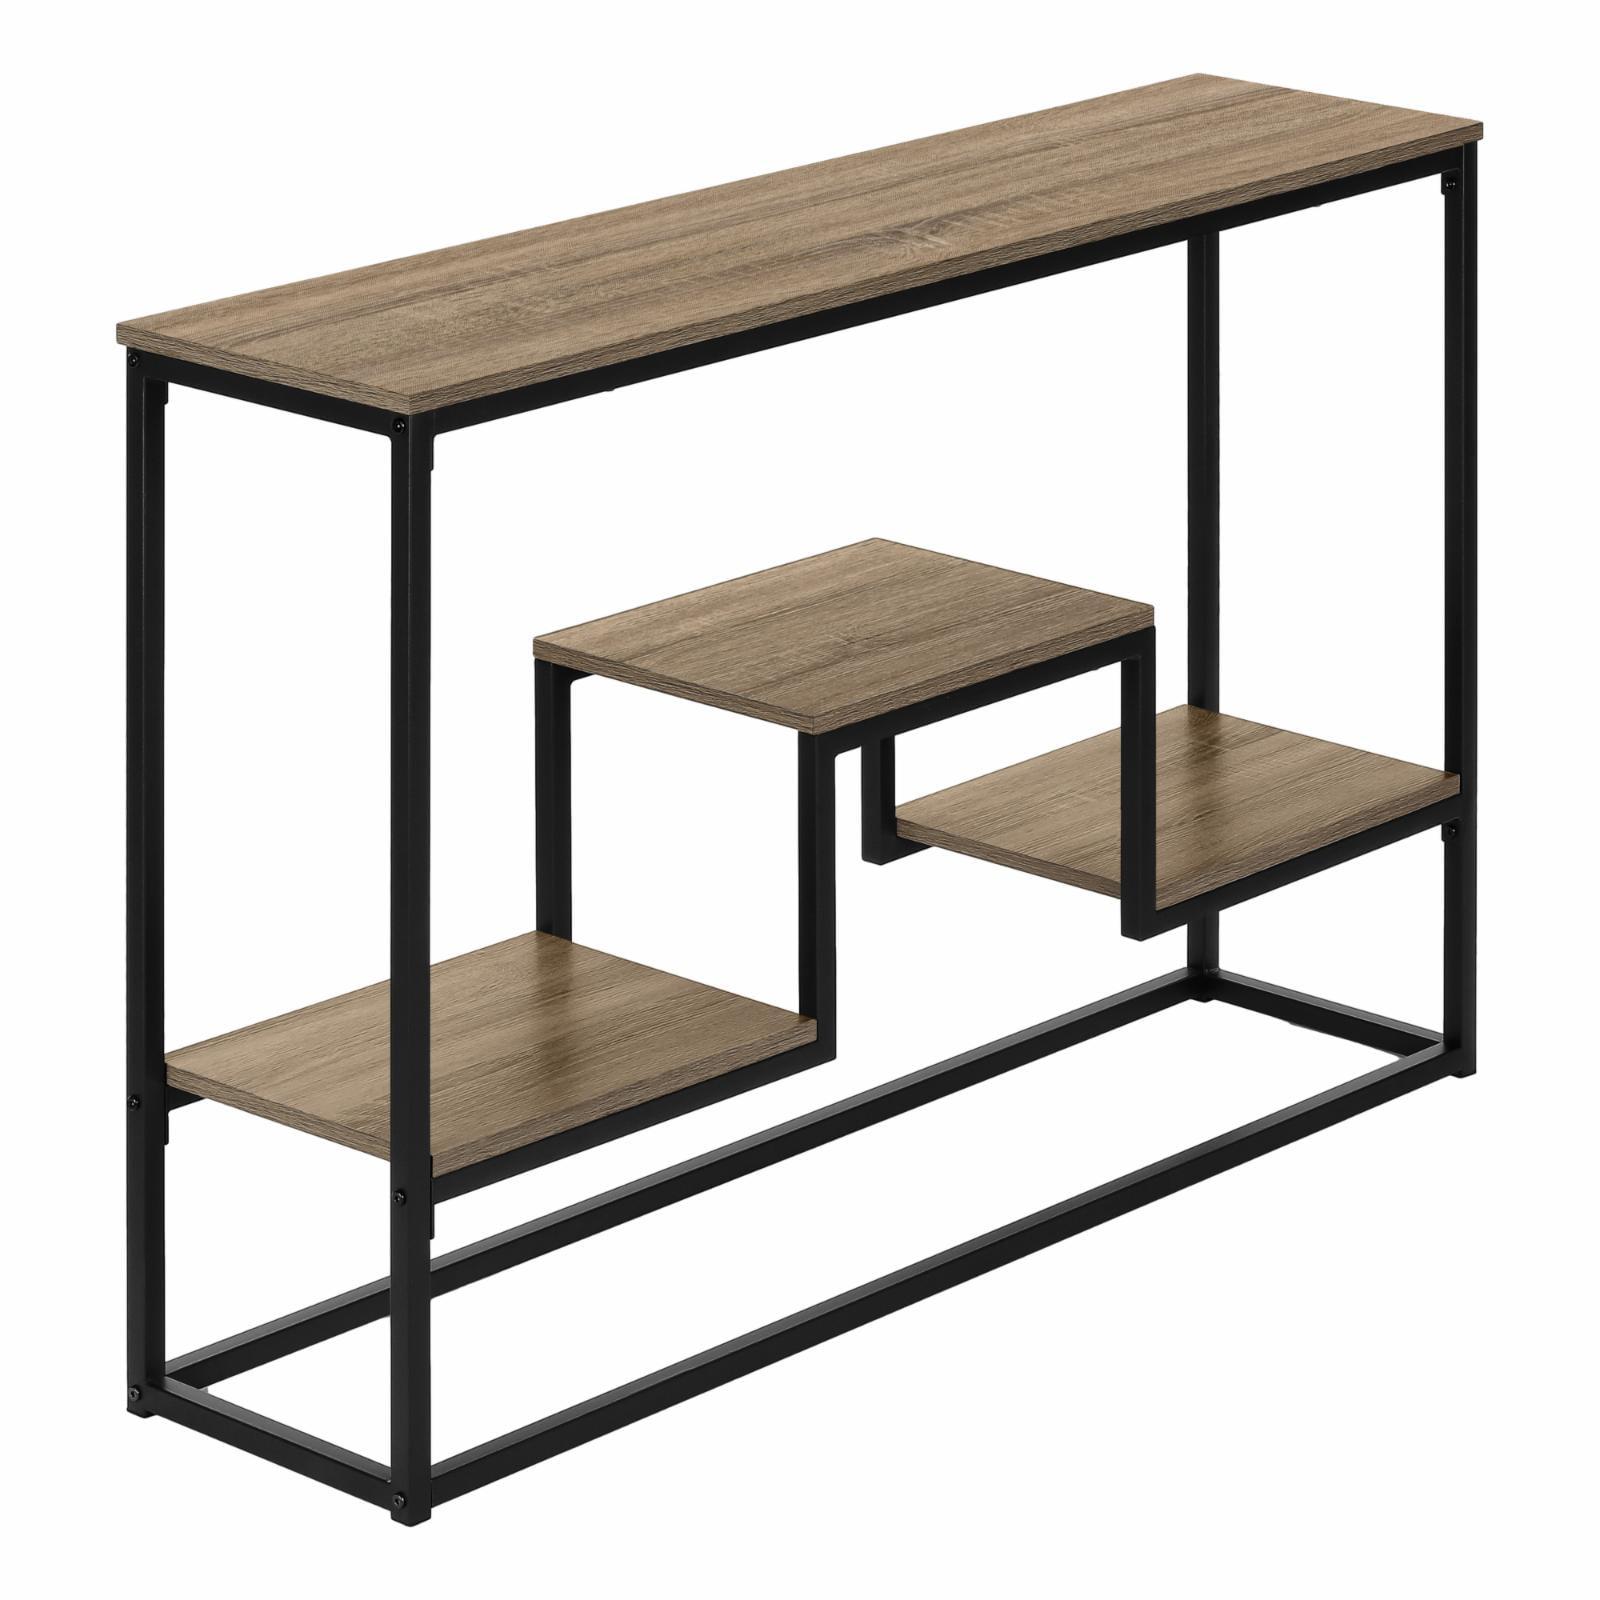 Contemporary Black and Beige Metal-Wood Console Table with Multi-Level Storage